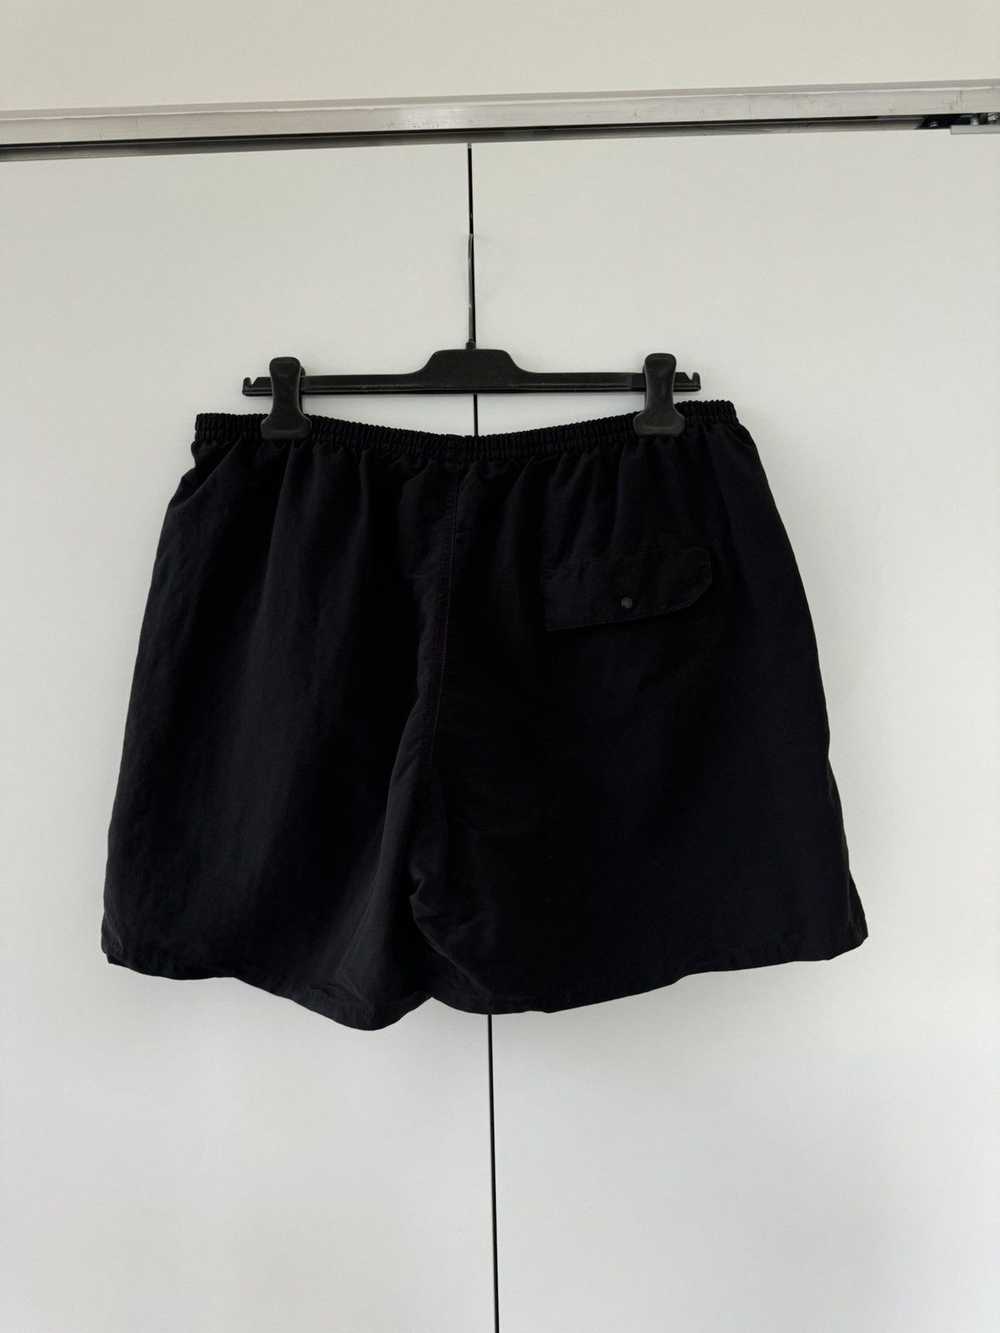 Patagonia 5” Baggie Shorts with Nets Black XL - image 3